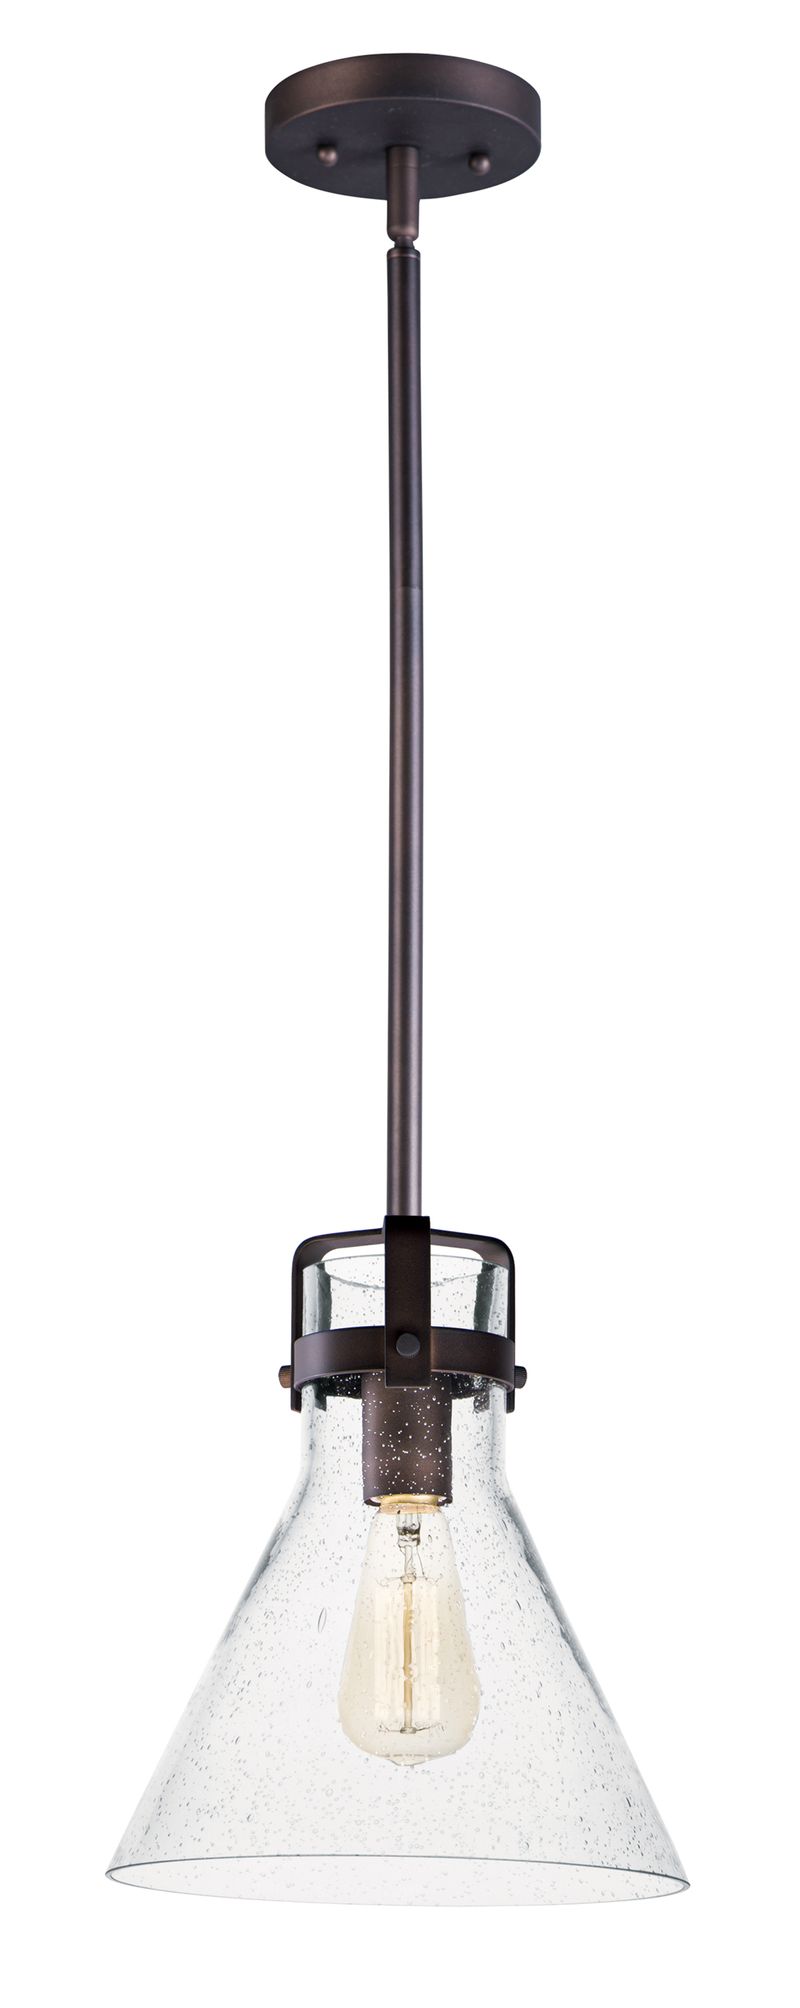 Seafarer 10' x 56' Oil Rubbed Bronze Single Pendant with 1 Light - (Steel material) - 783209213784